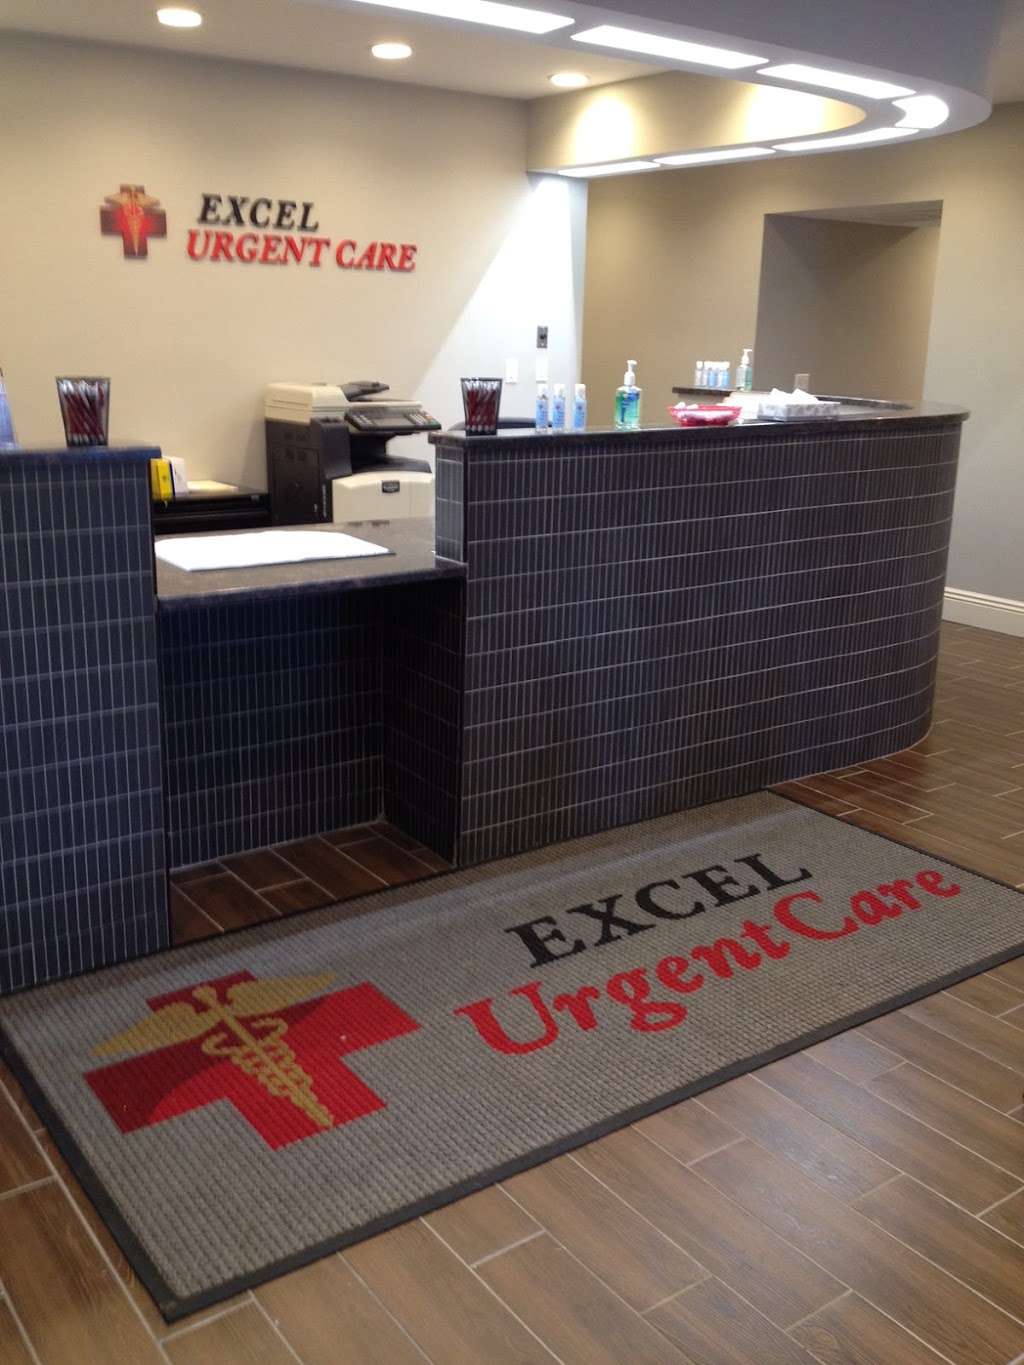 Excell urgent care information